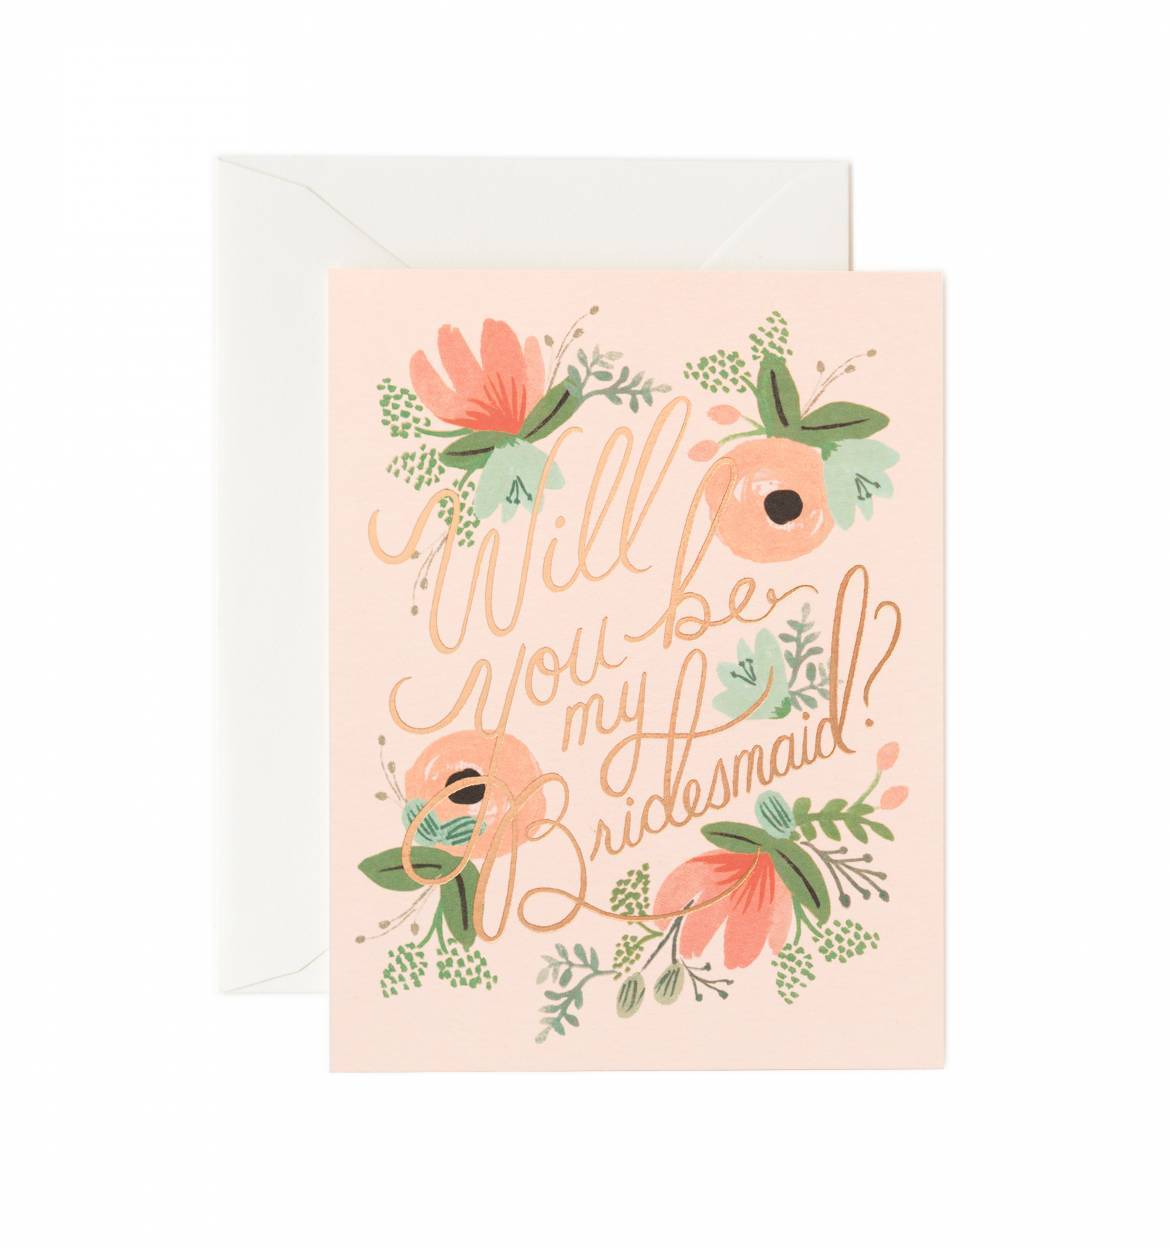 Blushing Bridesmaid Boxed Set by Rifle Paper Co. 